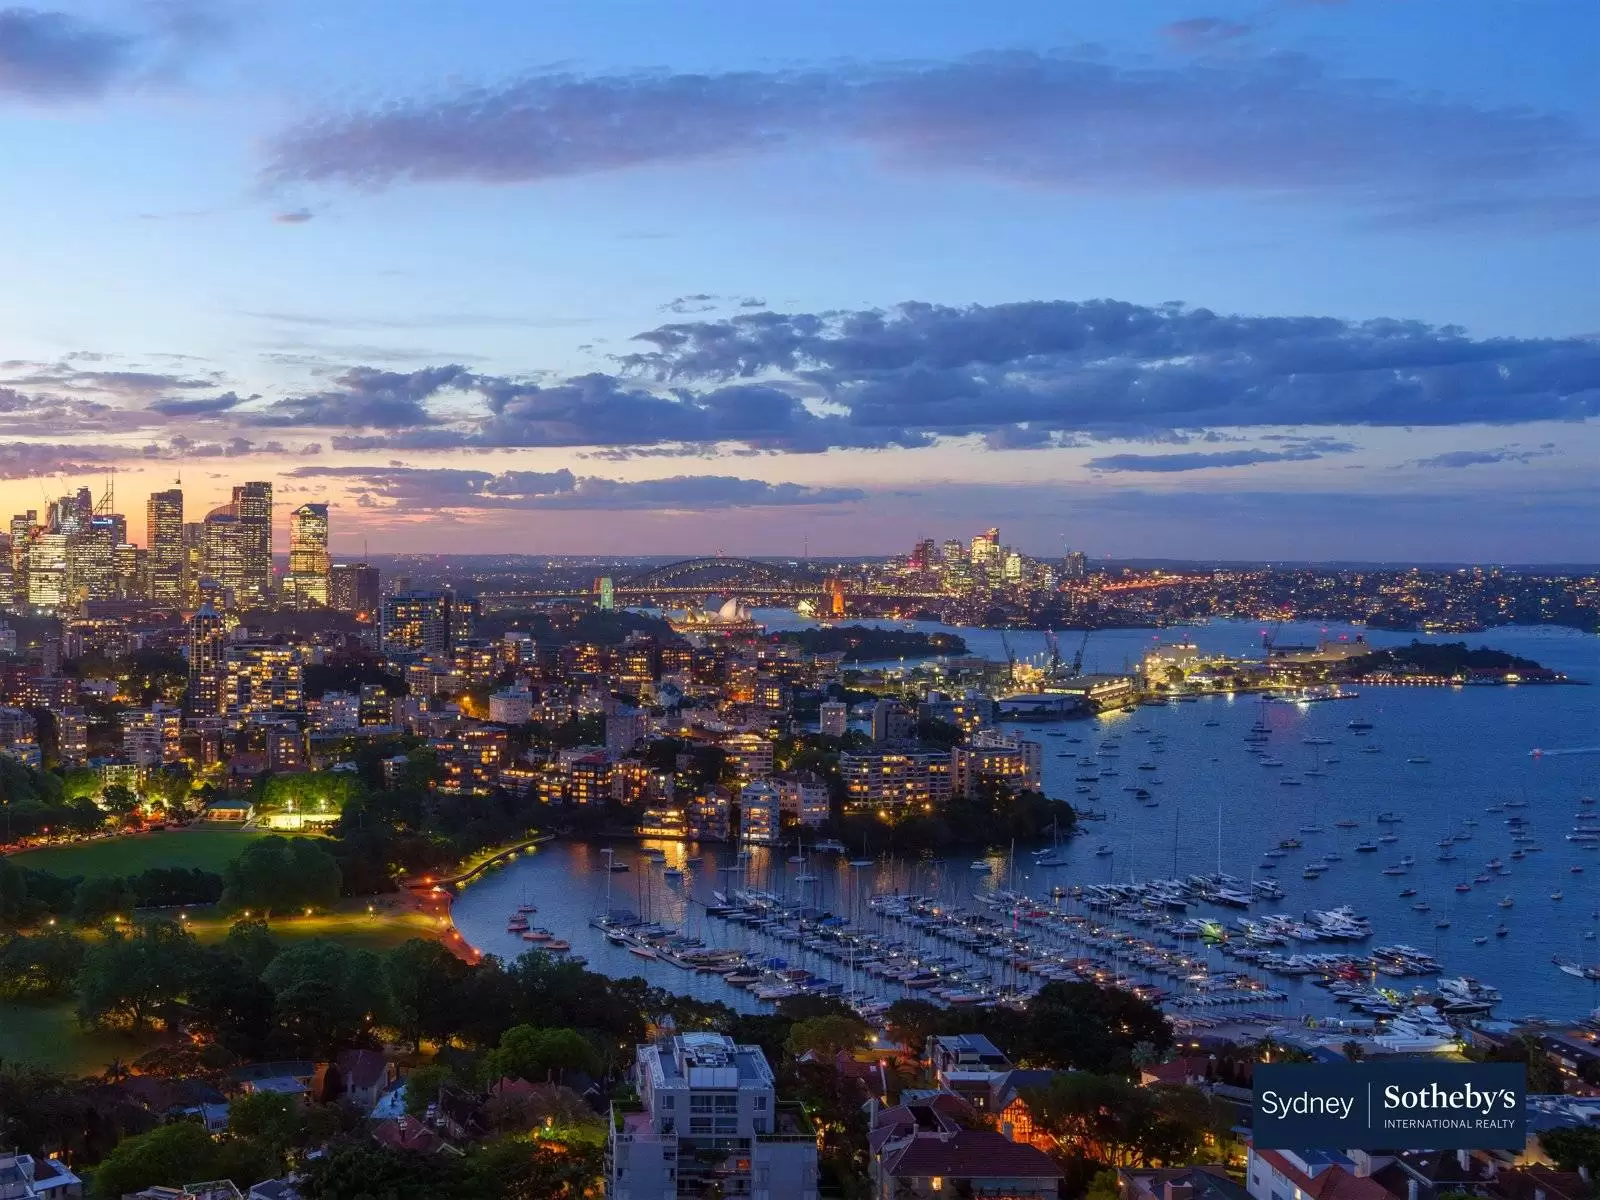 Photo #2: 26a/3 Darling Point Road, Darling Point - Leased by Sydney Sotheby's International Realty